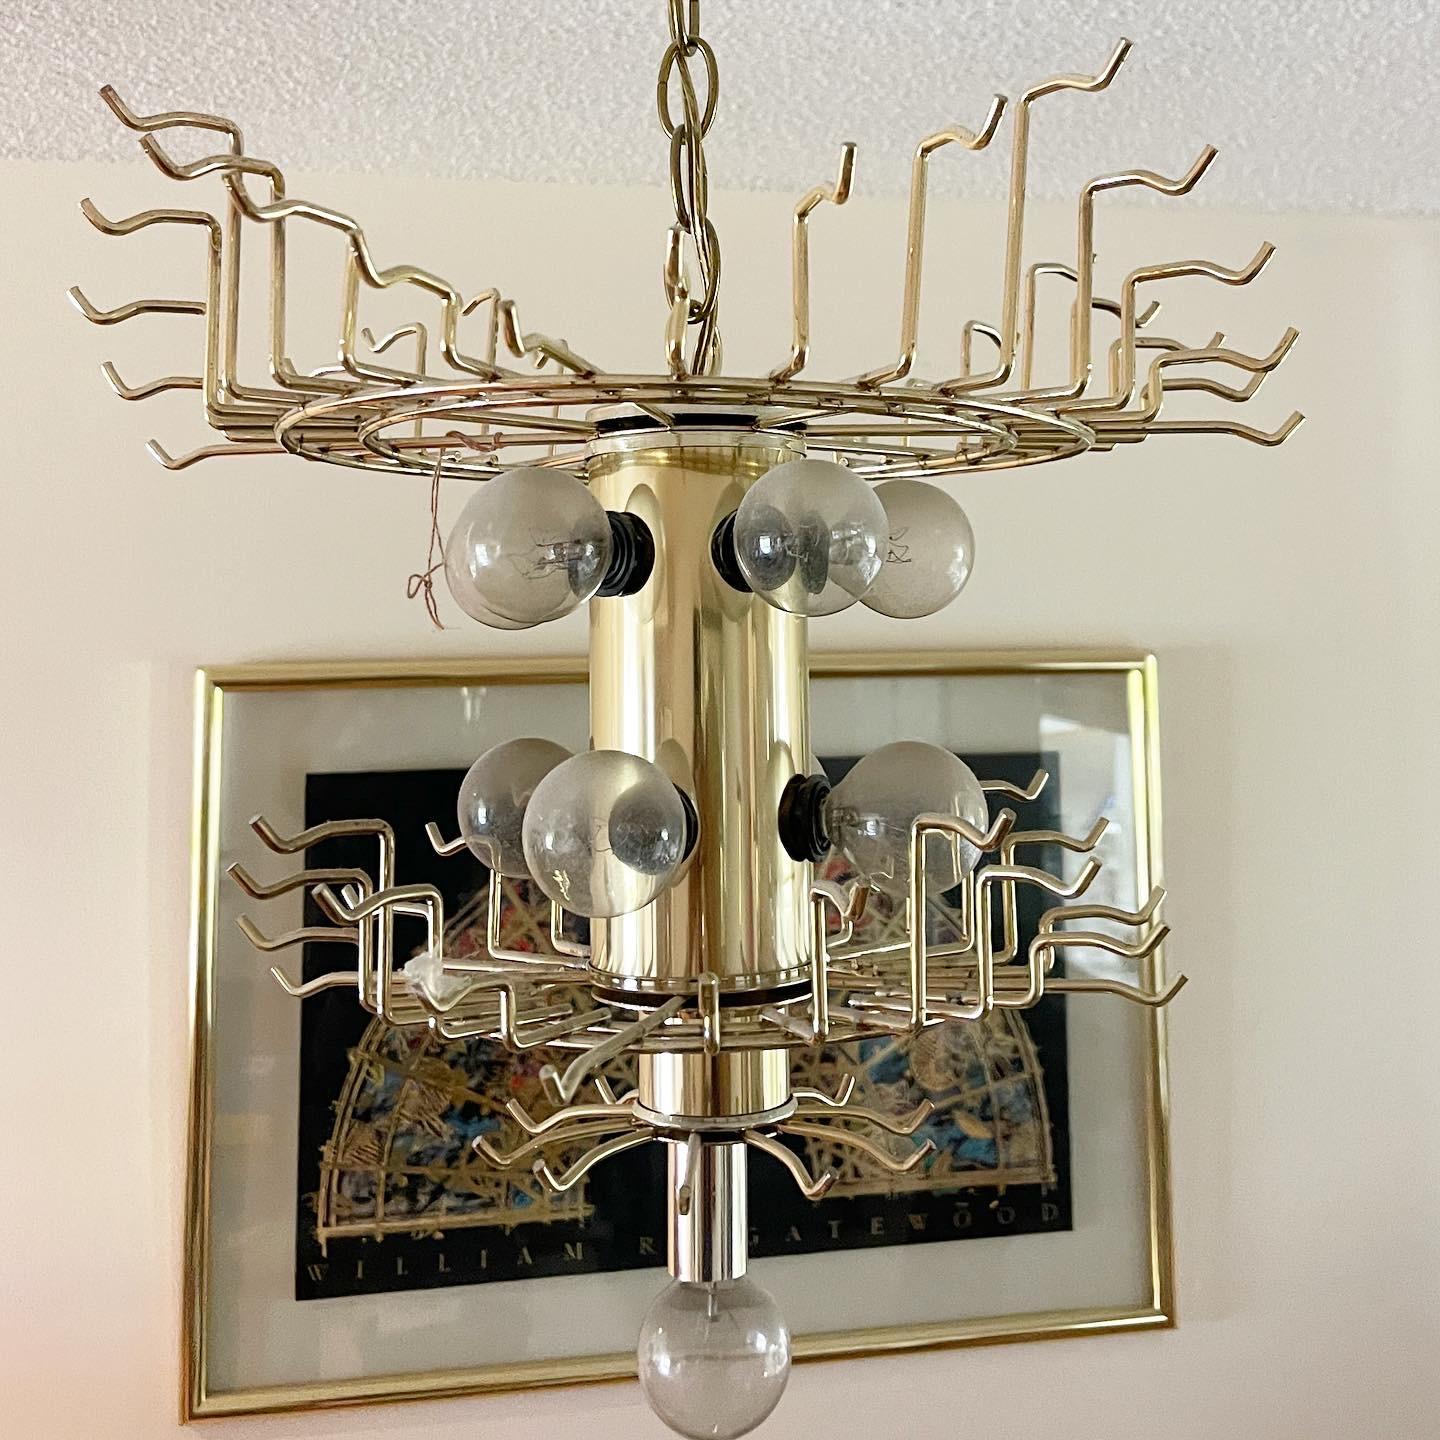 Exceptional vintage art deco lucite chandelier. Features alternating hangin pieces of lucite from clear to gold which appear as smoked when lit. Has 10 lights, 5 on top tier, 4 in the middle and one at the bottom.